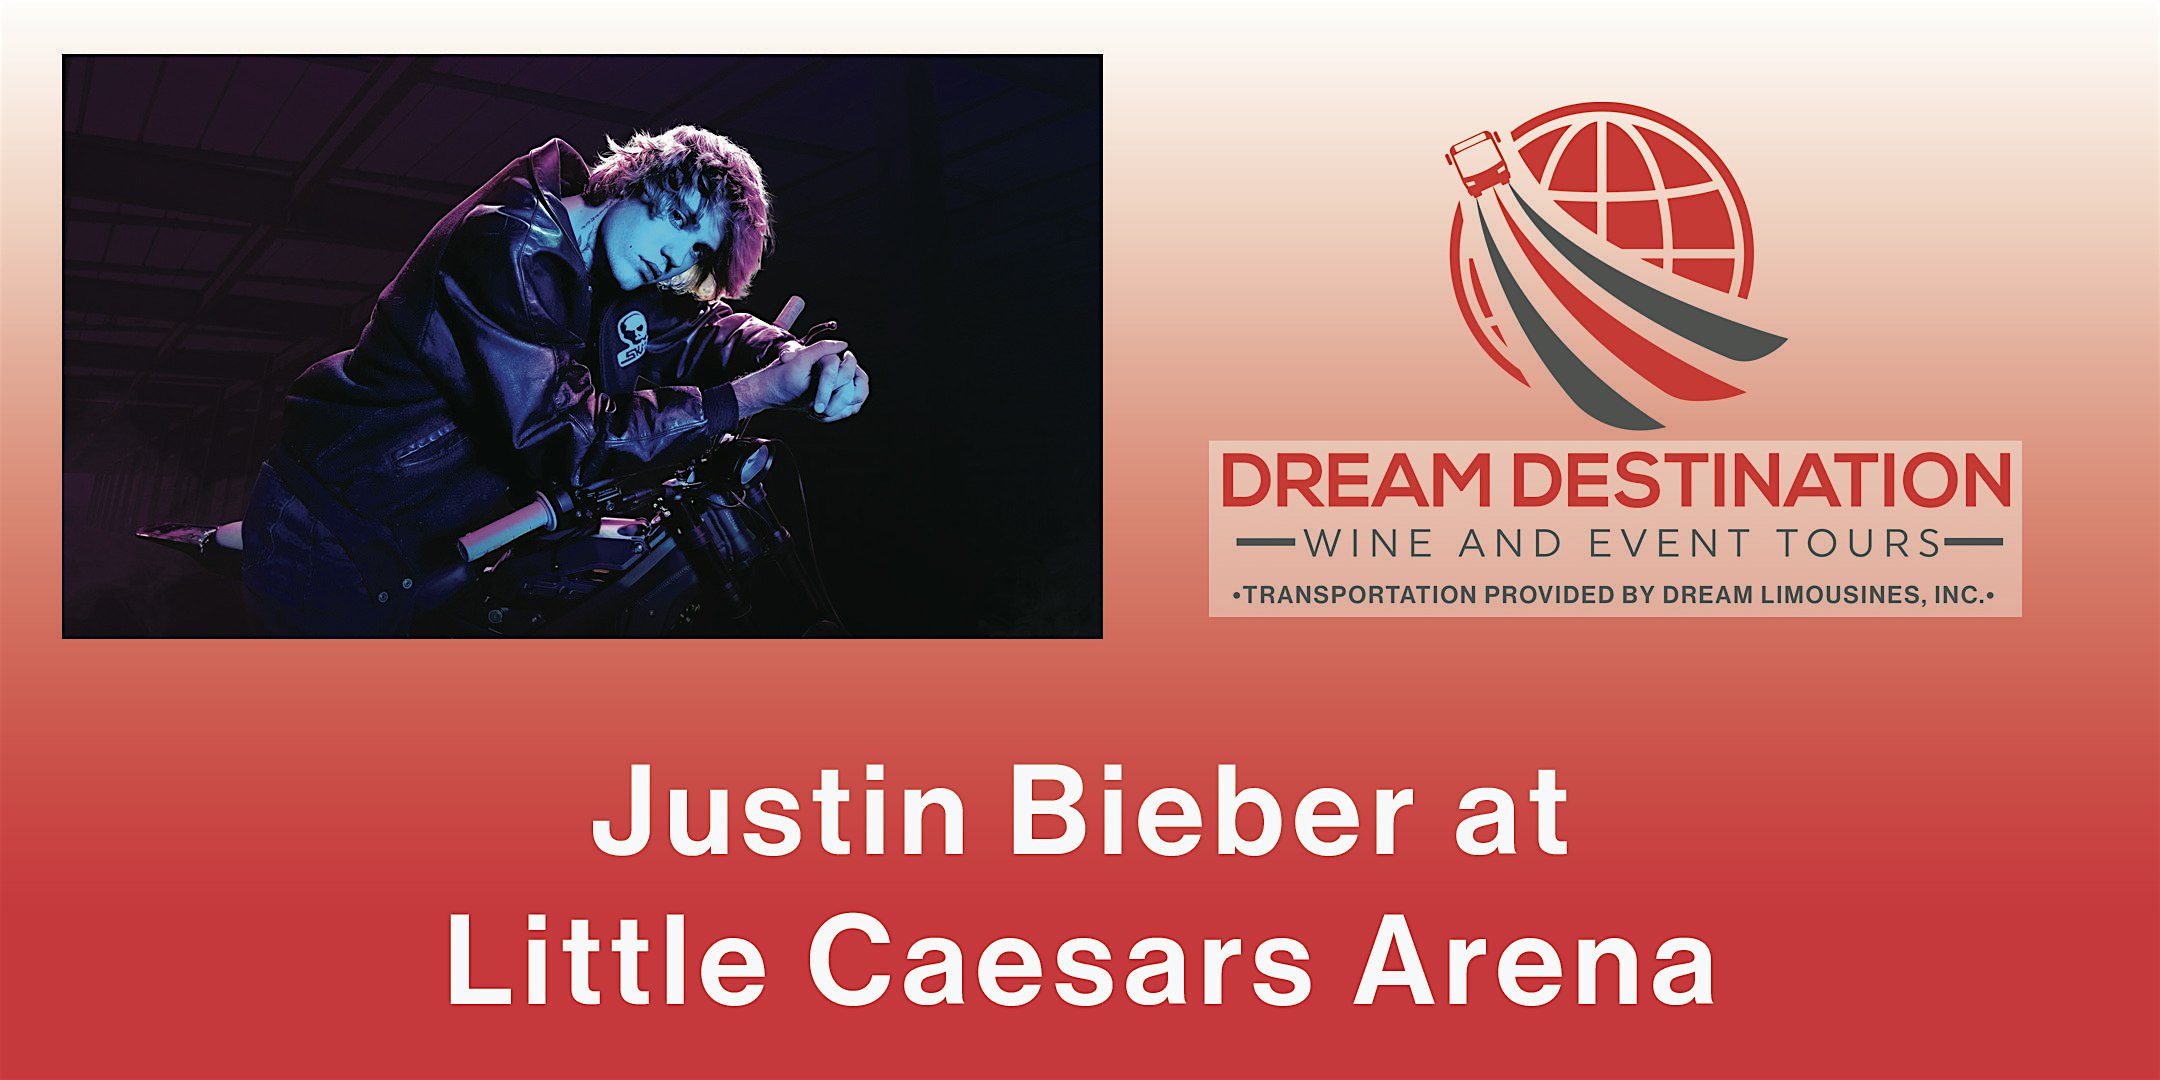 Shuttle to See Justin Bieber at Little Caesars Arena